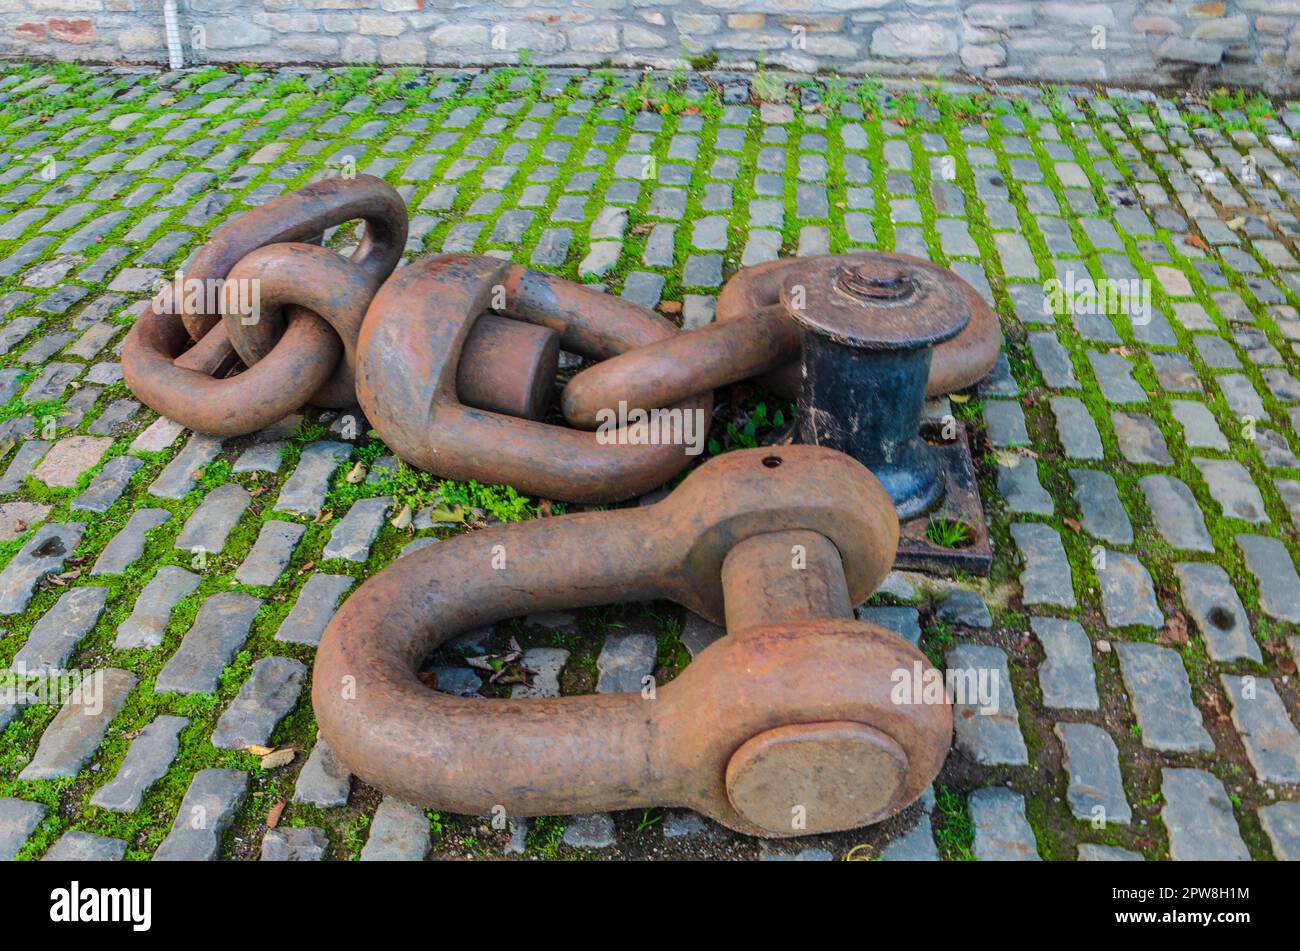 Bristol South west England November 25 2022 - Large rusty mooring chain lying on cobblestones probably from an old sailing ship on Bristol's quayside Stock Photo